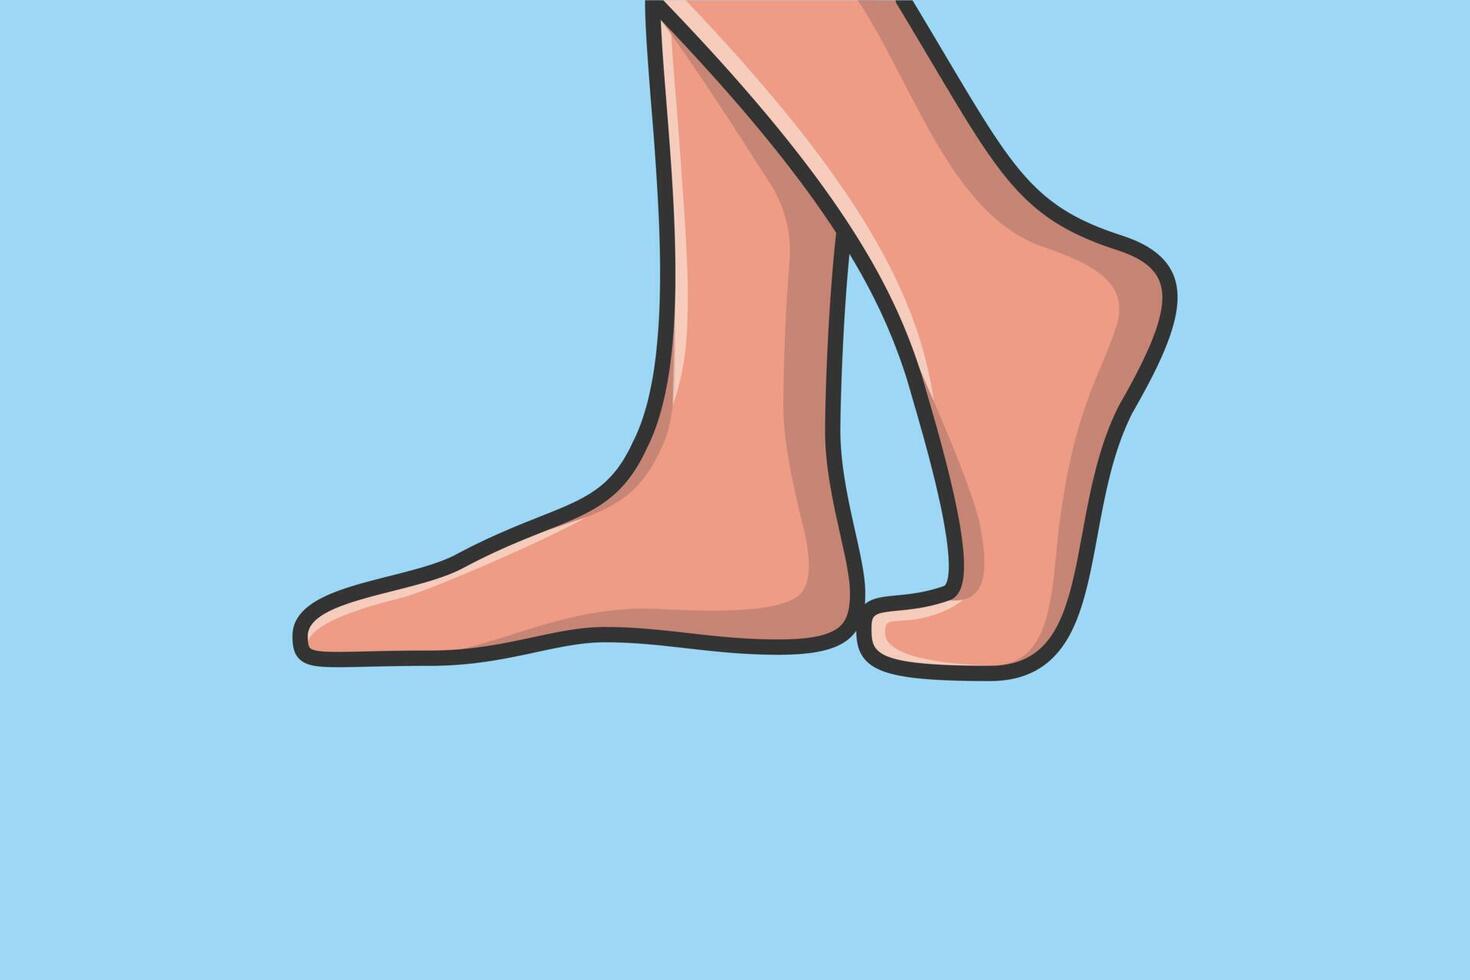 Human Feet vector illustration. People fashion icon concept. Person, side view human foot. Ideal for catalogs, informational and institutional guides vector design.